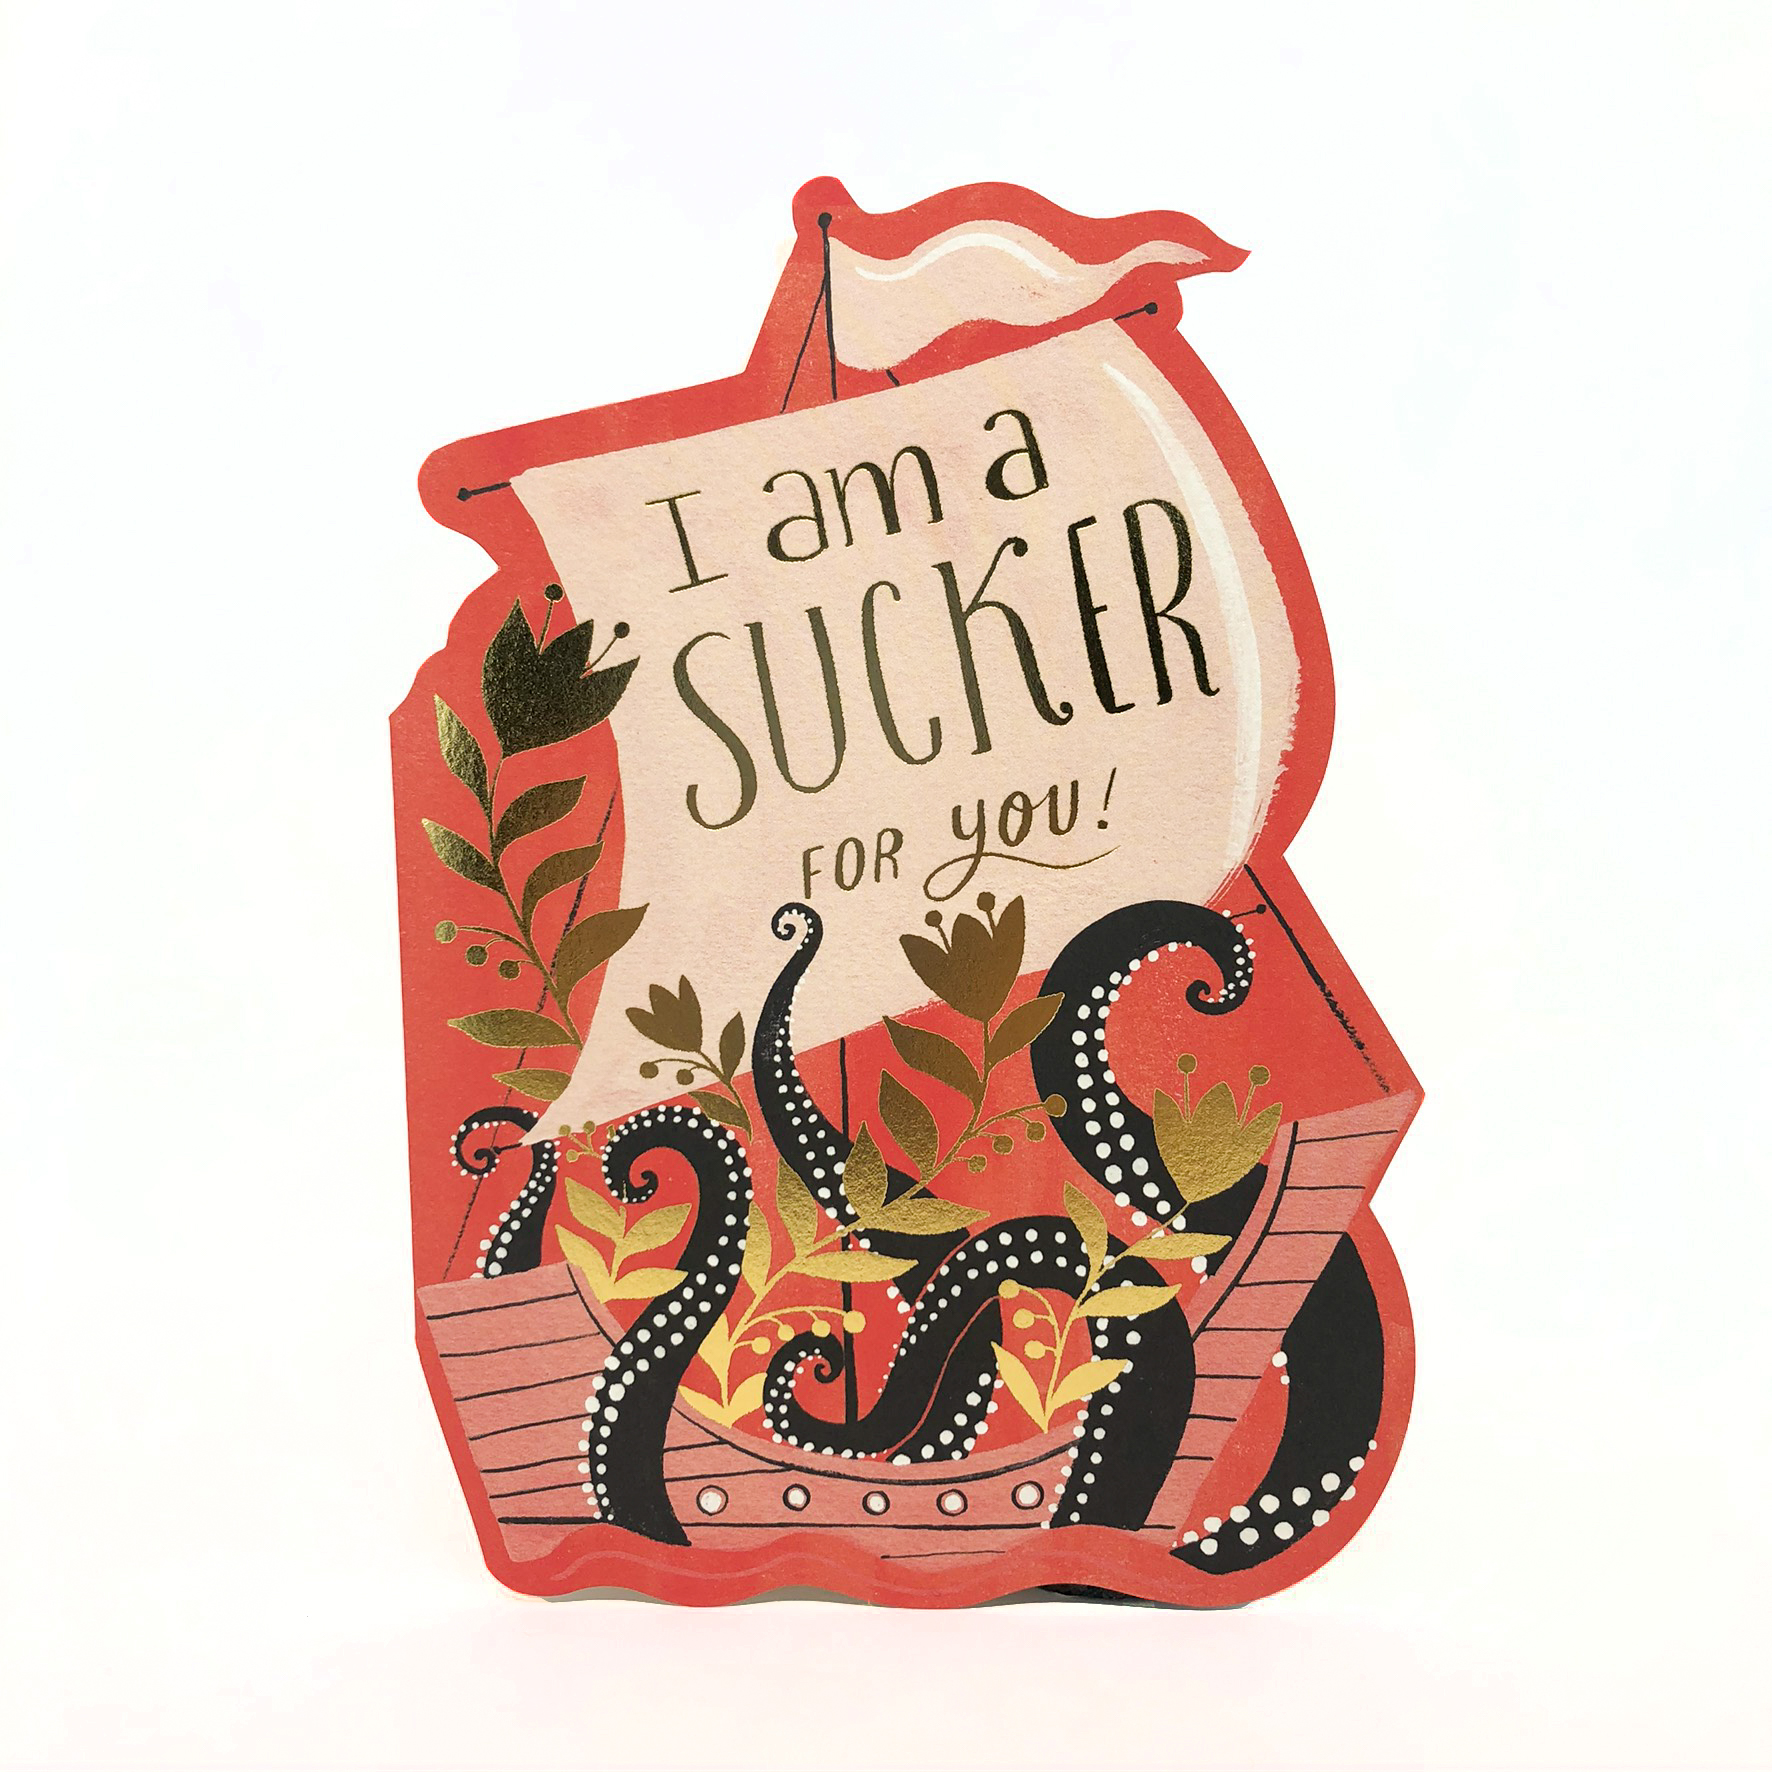 Greeting card showing a ship and tentacles; reads 